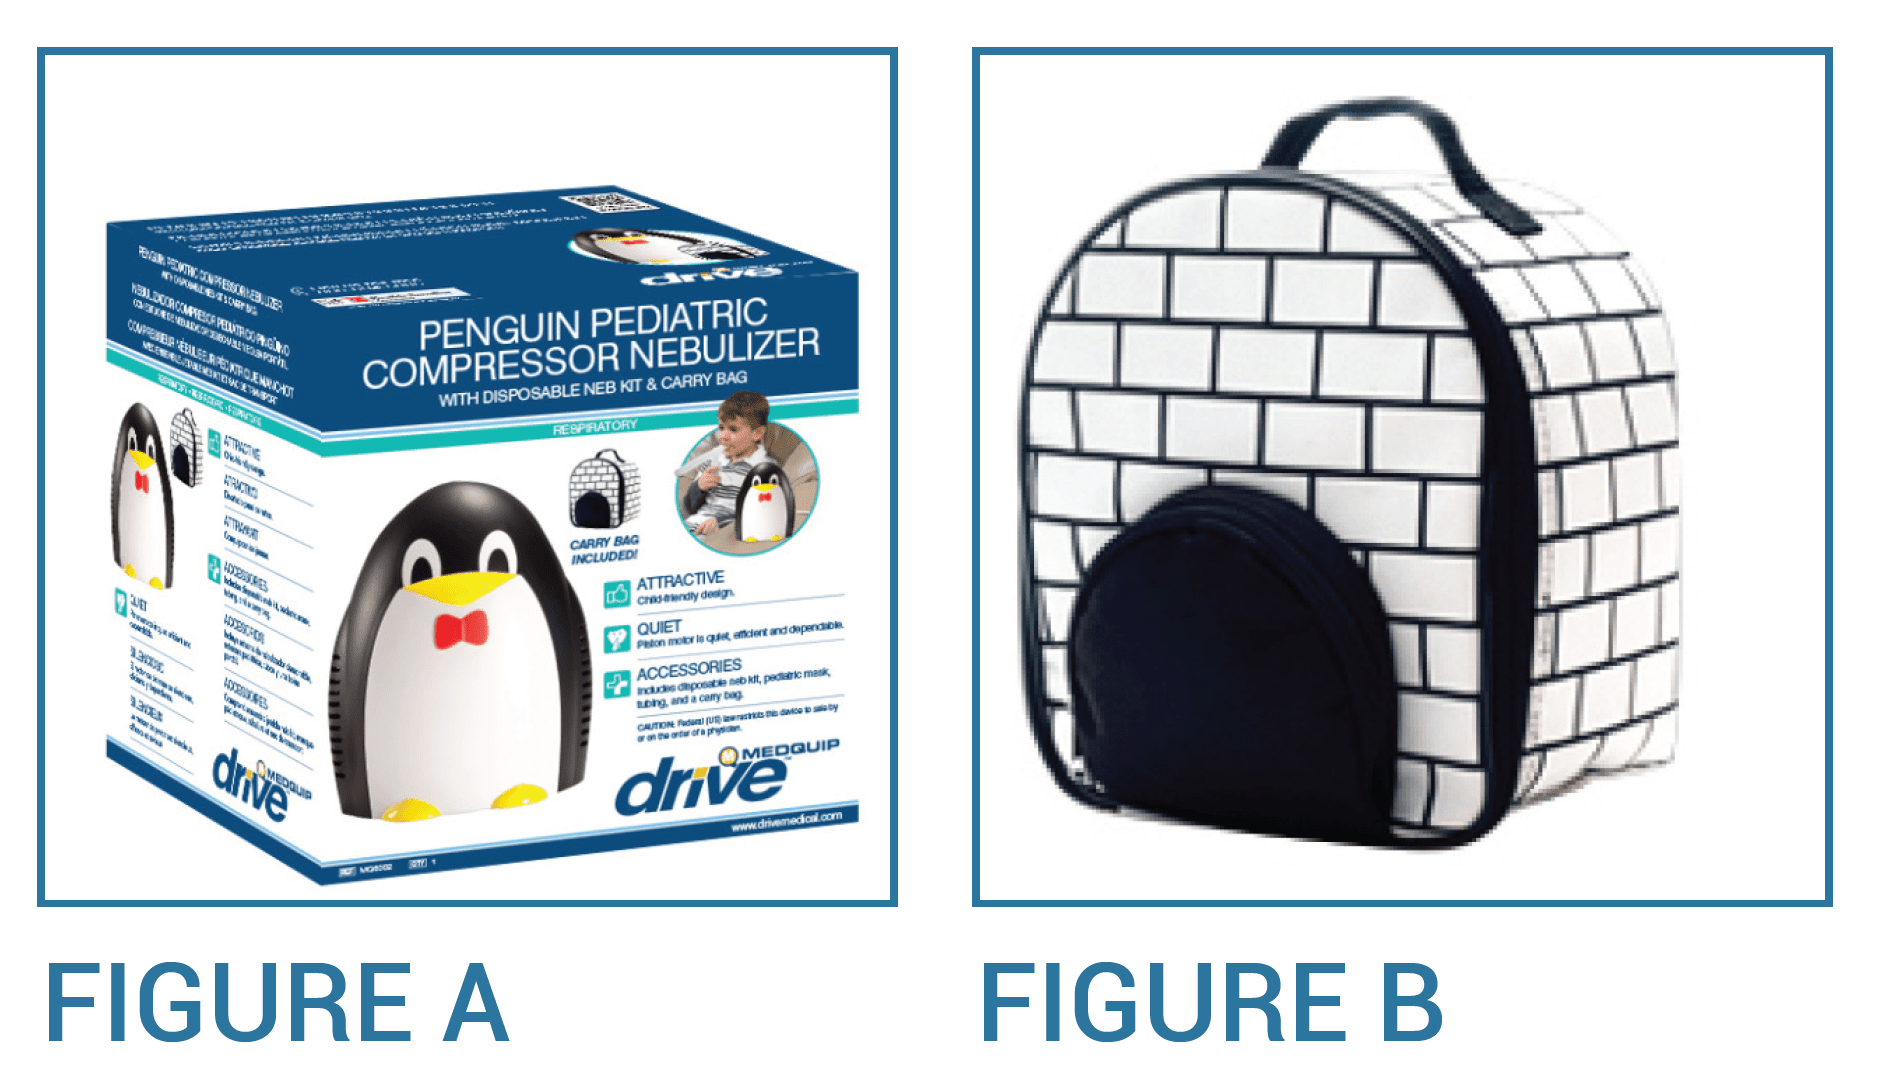 Penguin Nebulizer features: Help Inc. - Everyone is relying on you. You can rely on us.